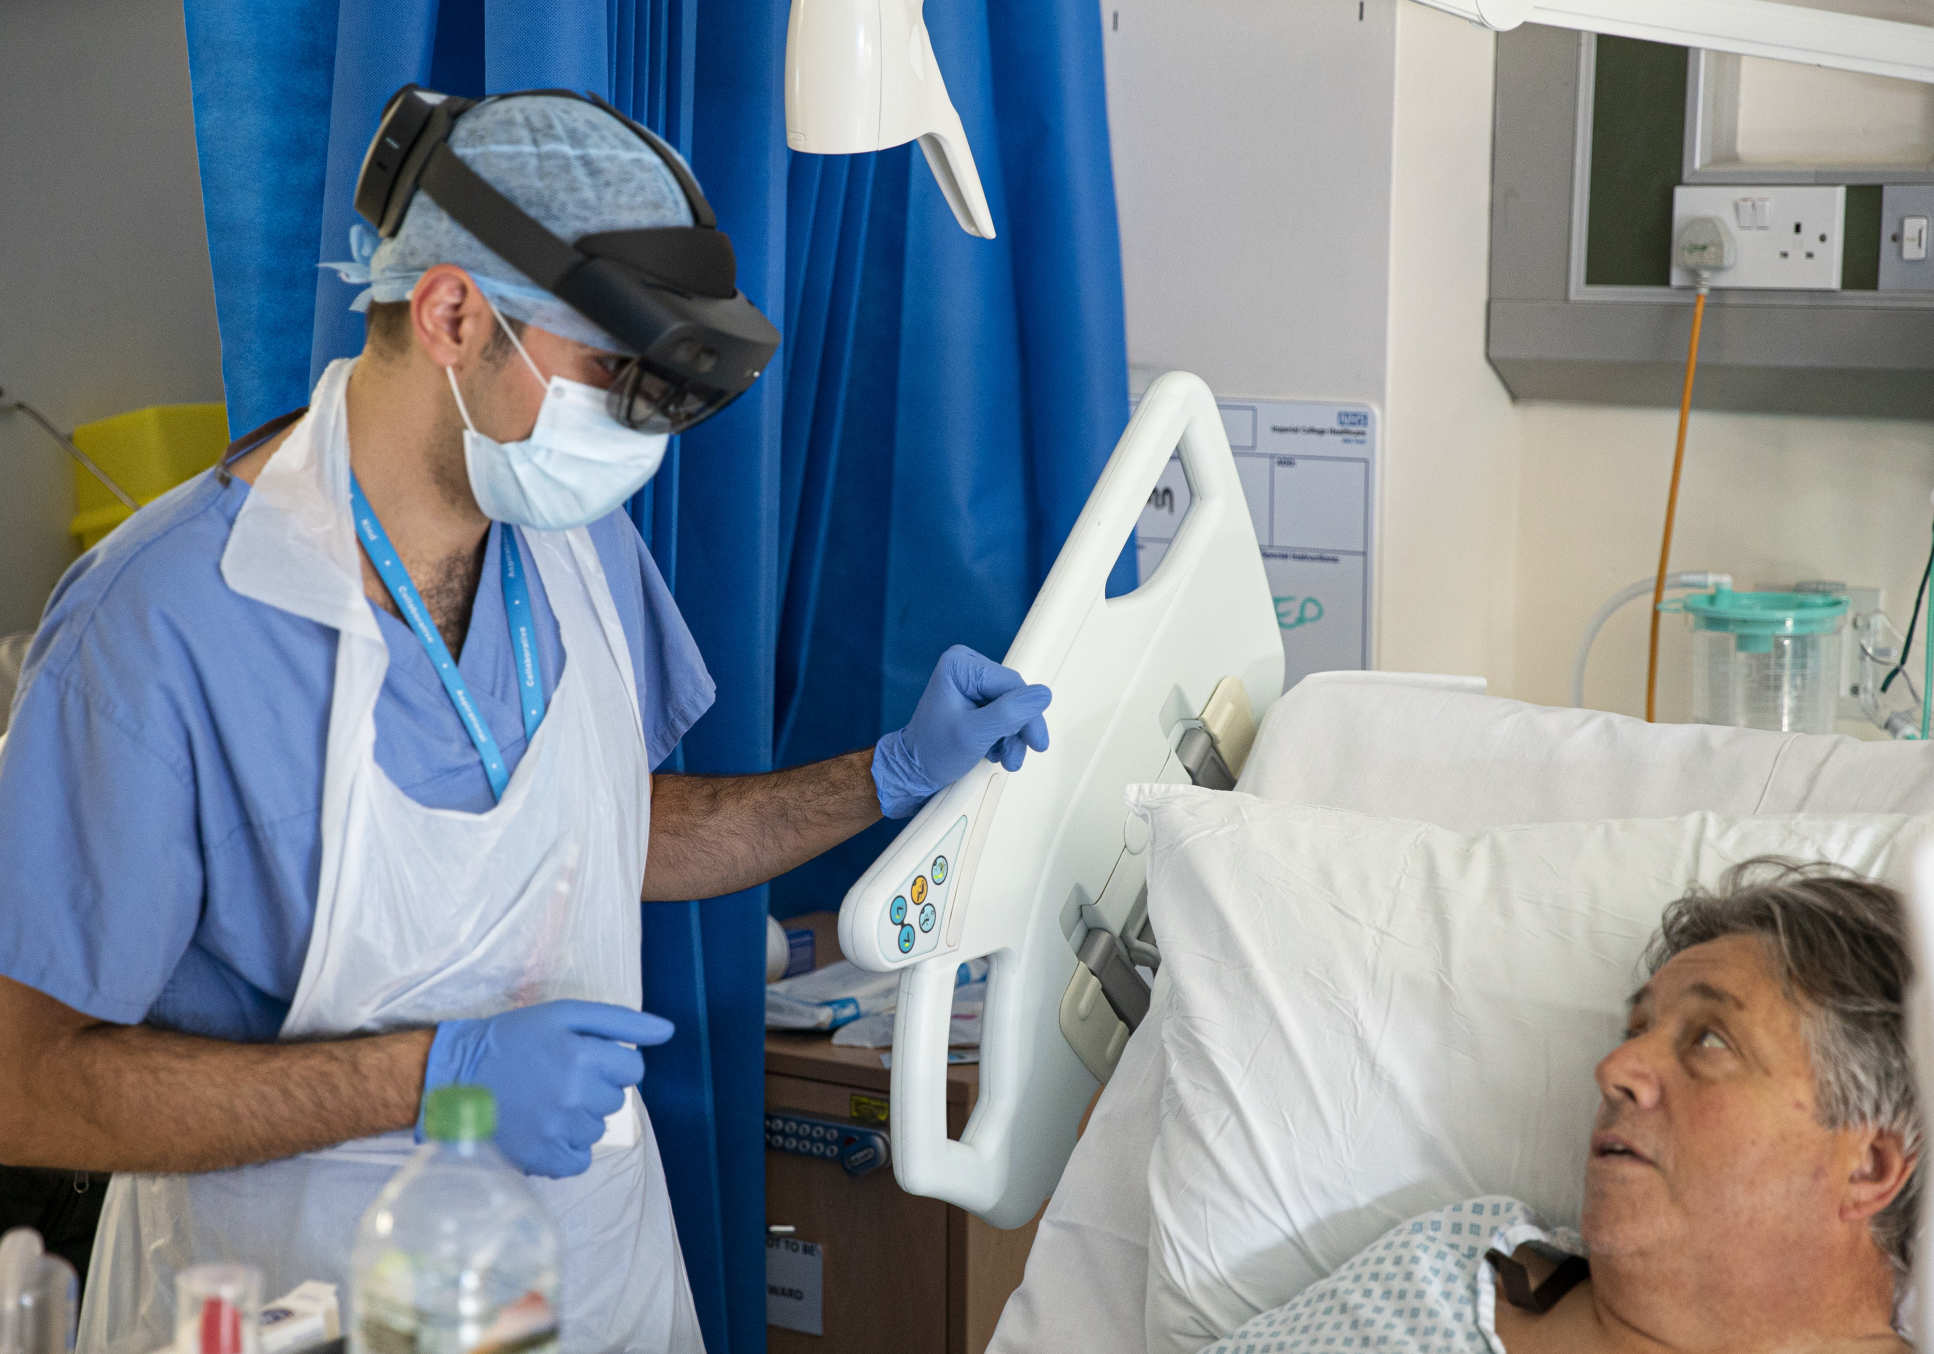 A photograph of a doctor wearing HoloLens, talking to a patient